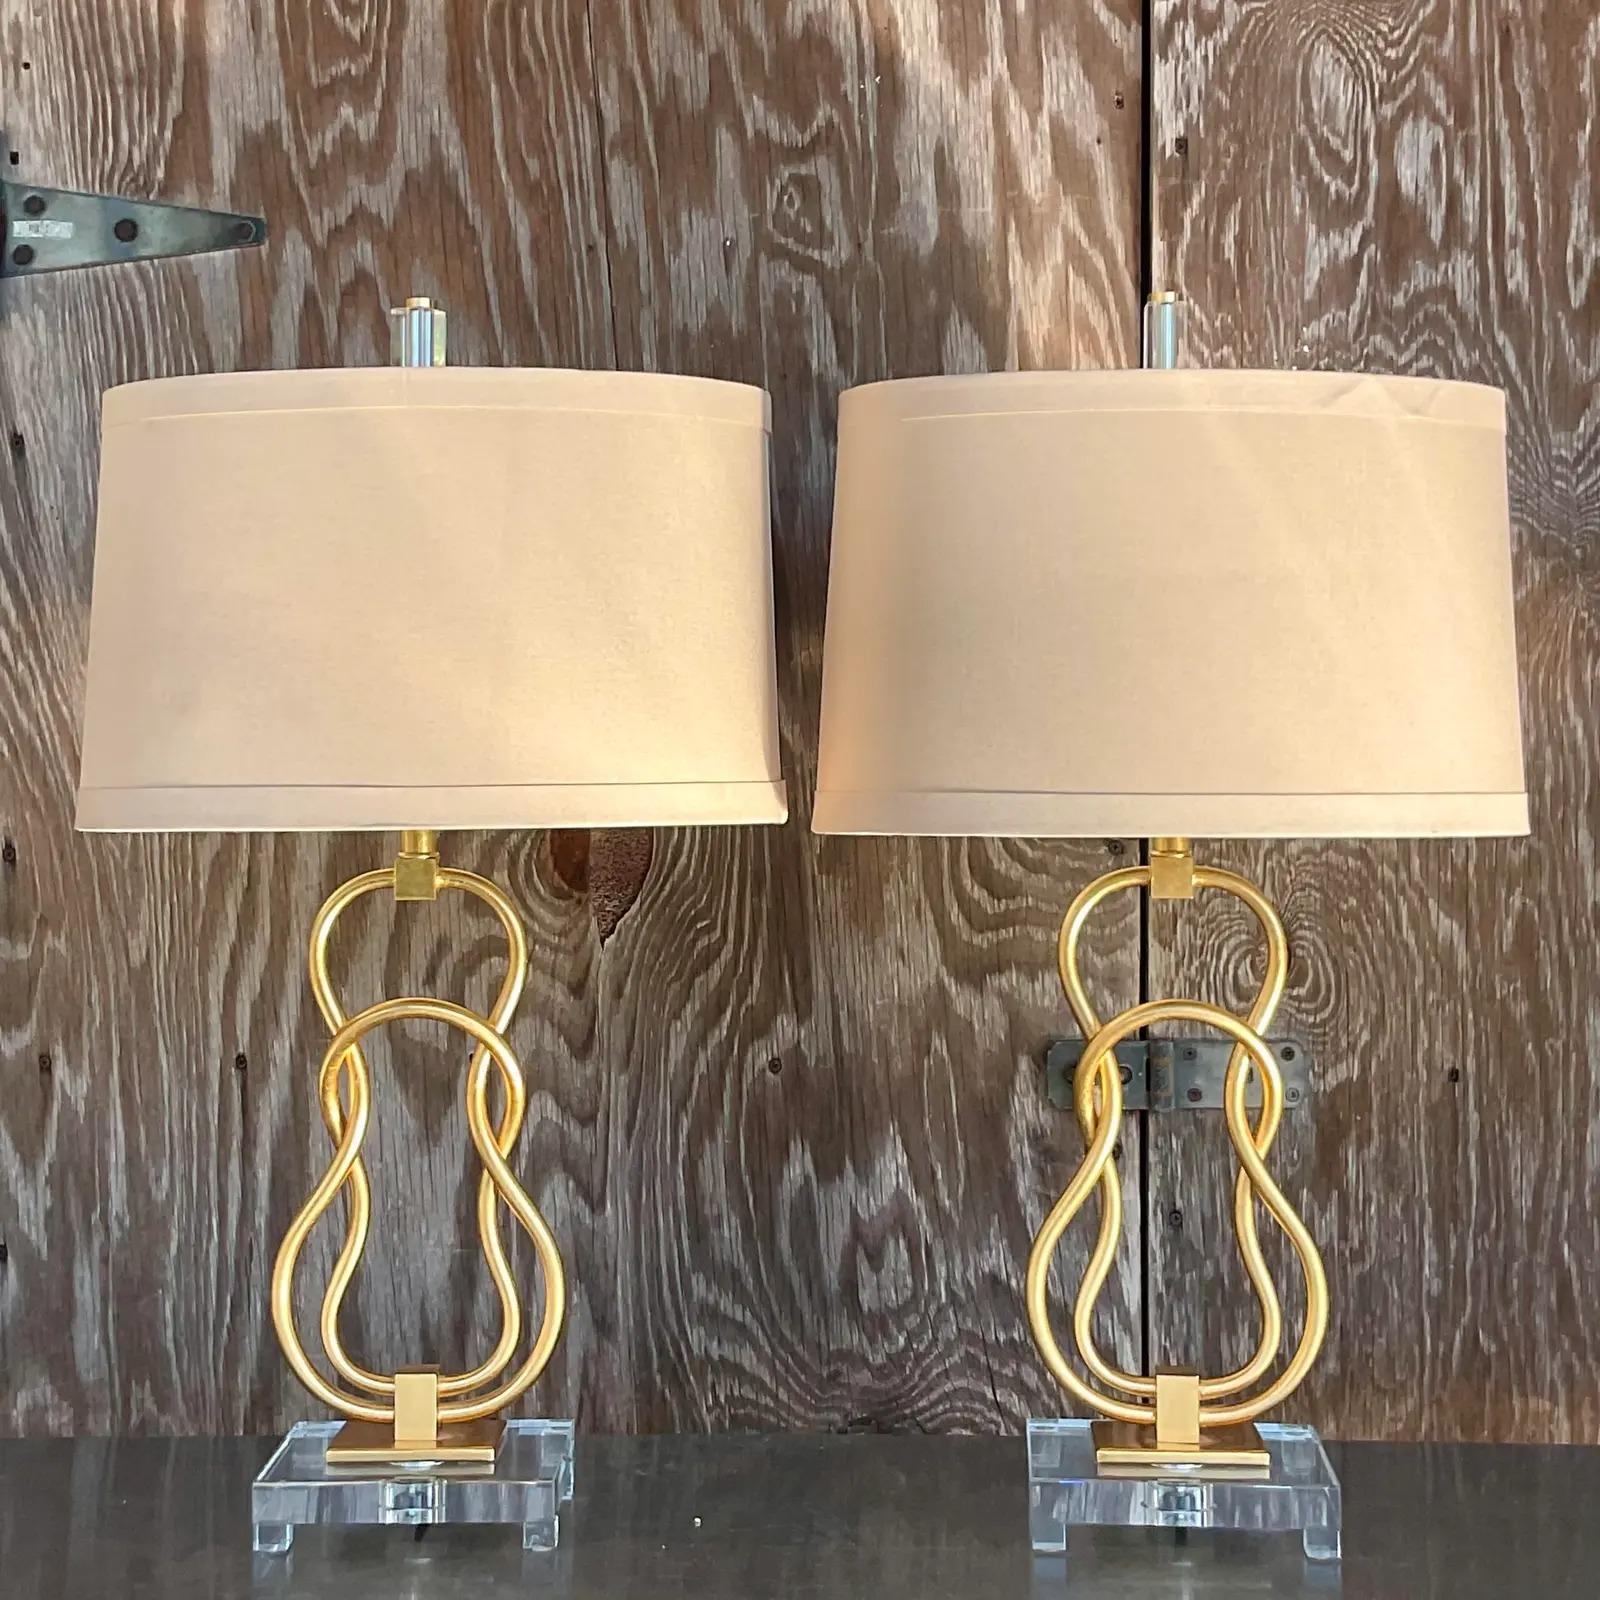 North American Vintage Contemporary Linked Gilt Rings Lamps - a Pair For Sale